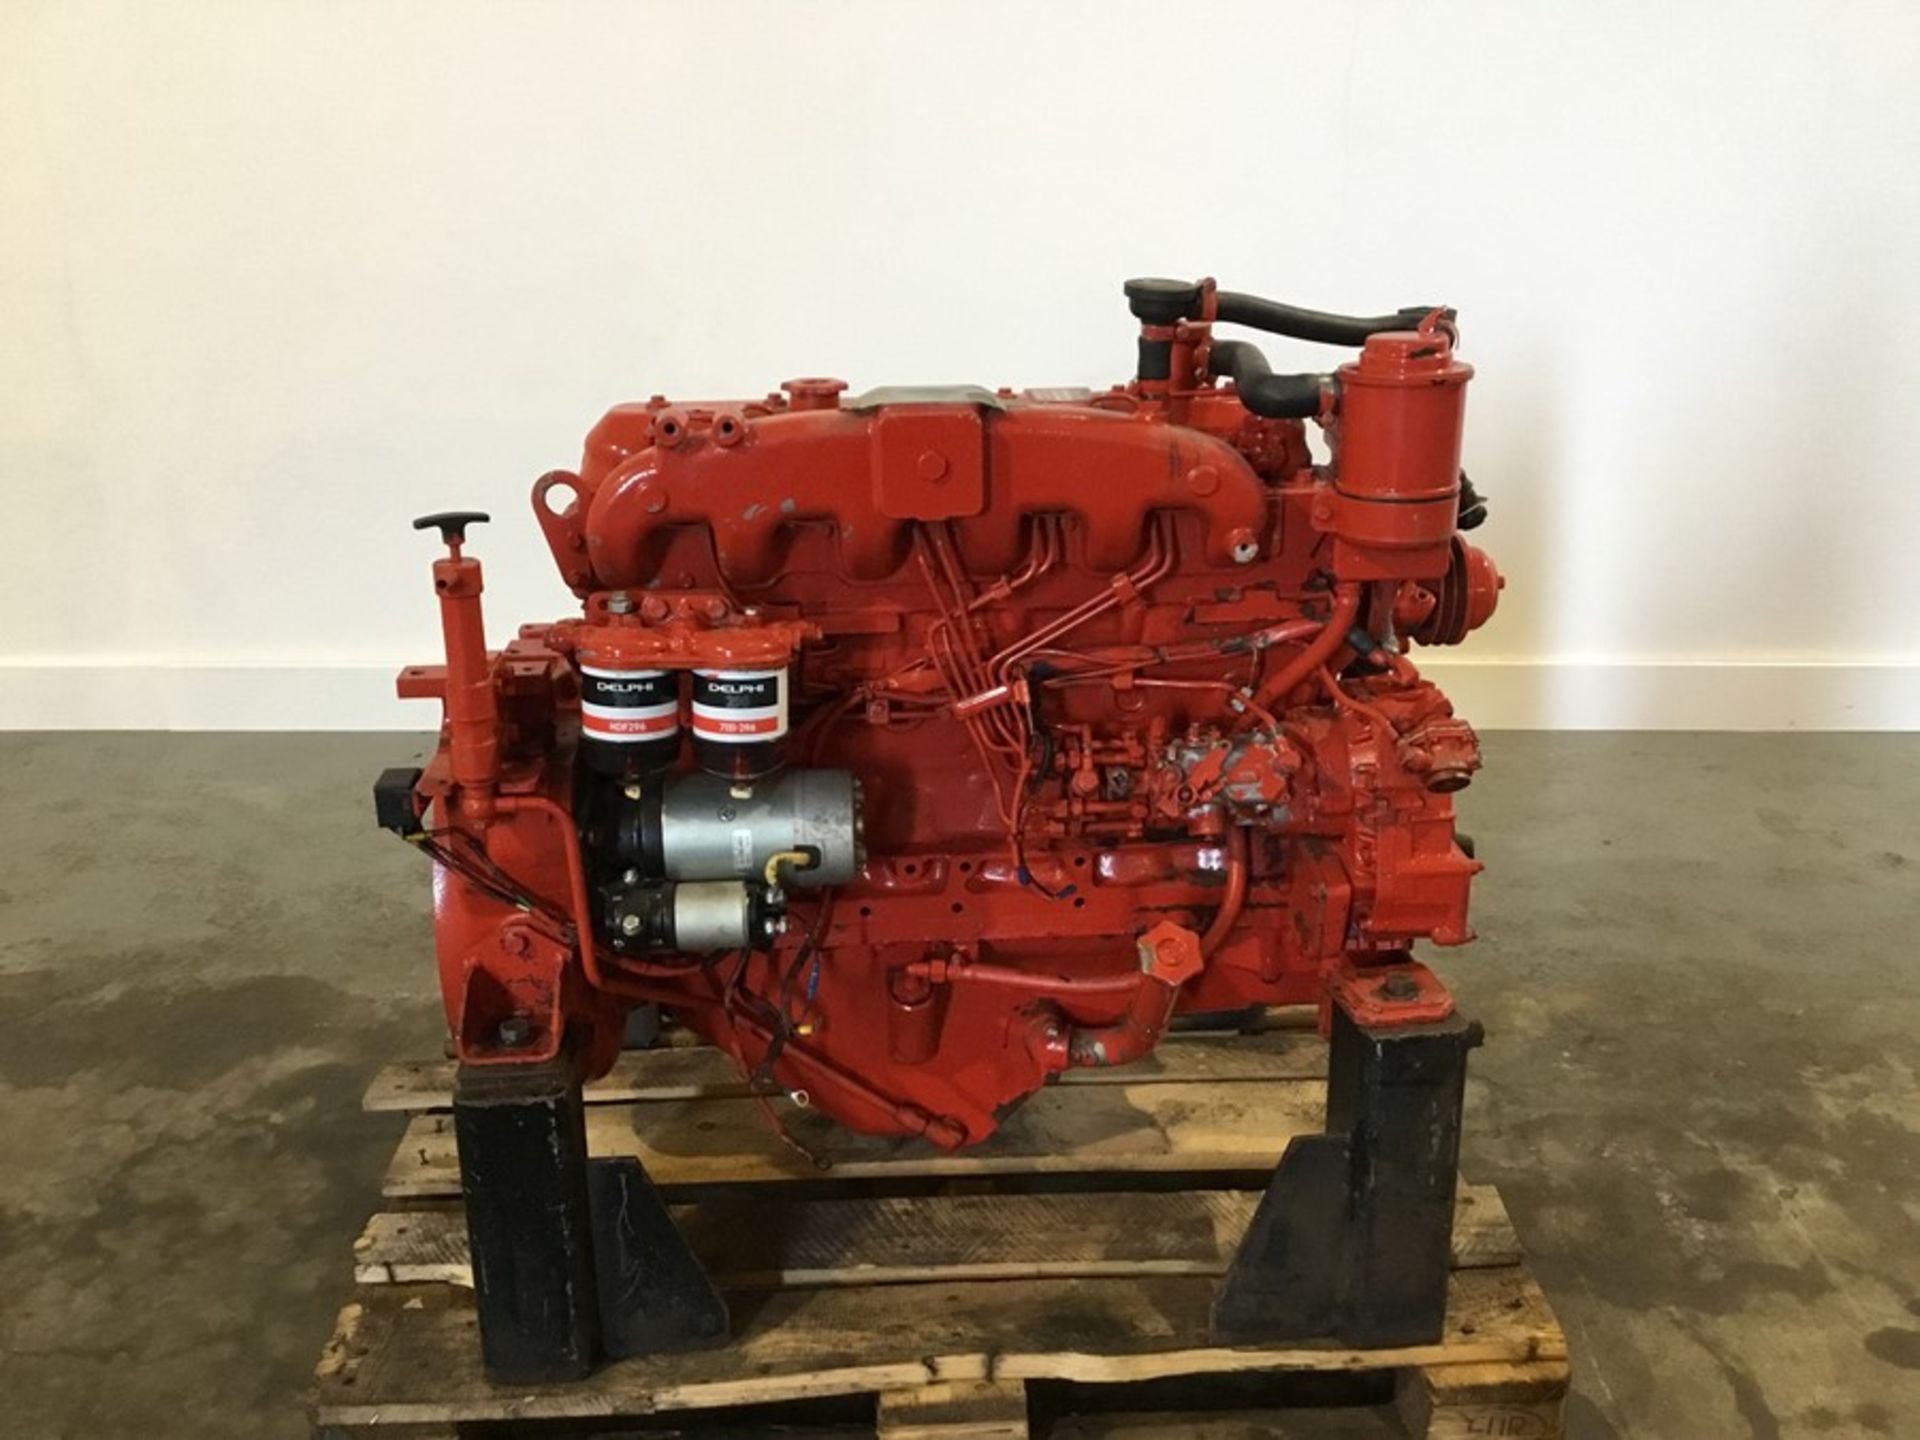 Iveco 8065 Diesel Engine: Iveco 8065M12 6cyl non Turbo Serial Number 850563 110hp@2500rpm - Image 2 of 18